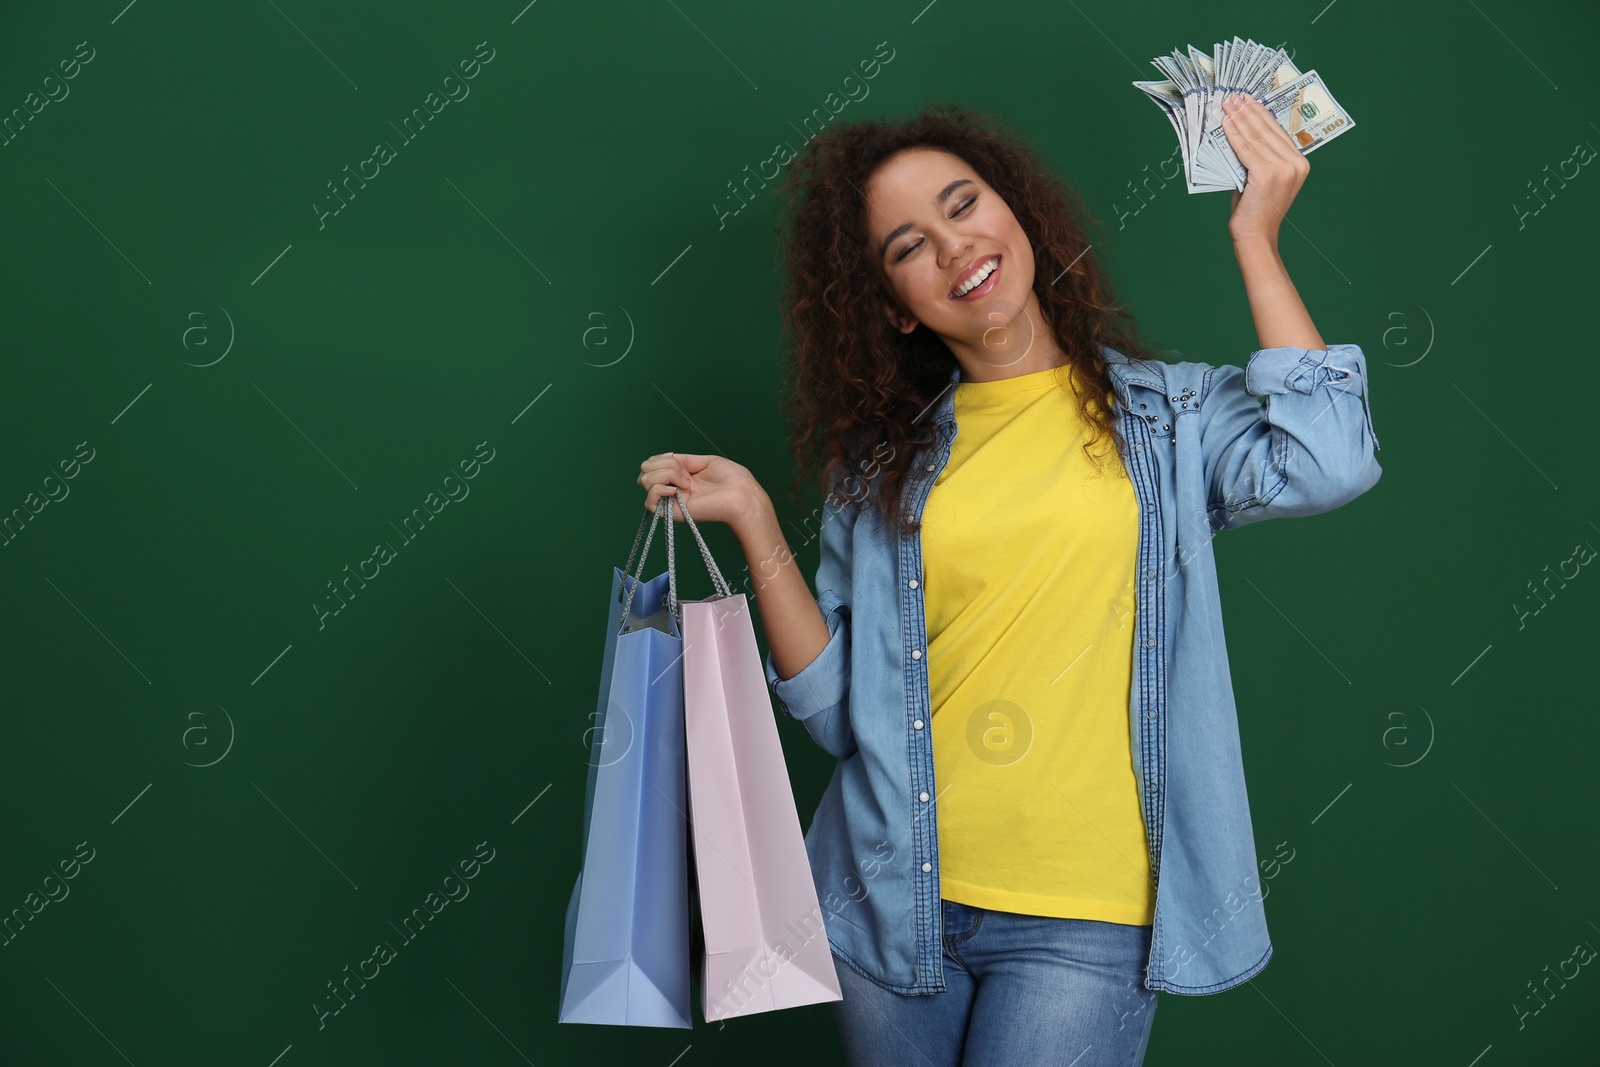 Photo of Young African-American woman with money and shopping bags on color background. Space for text